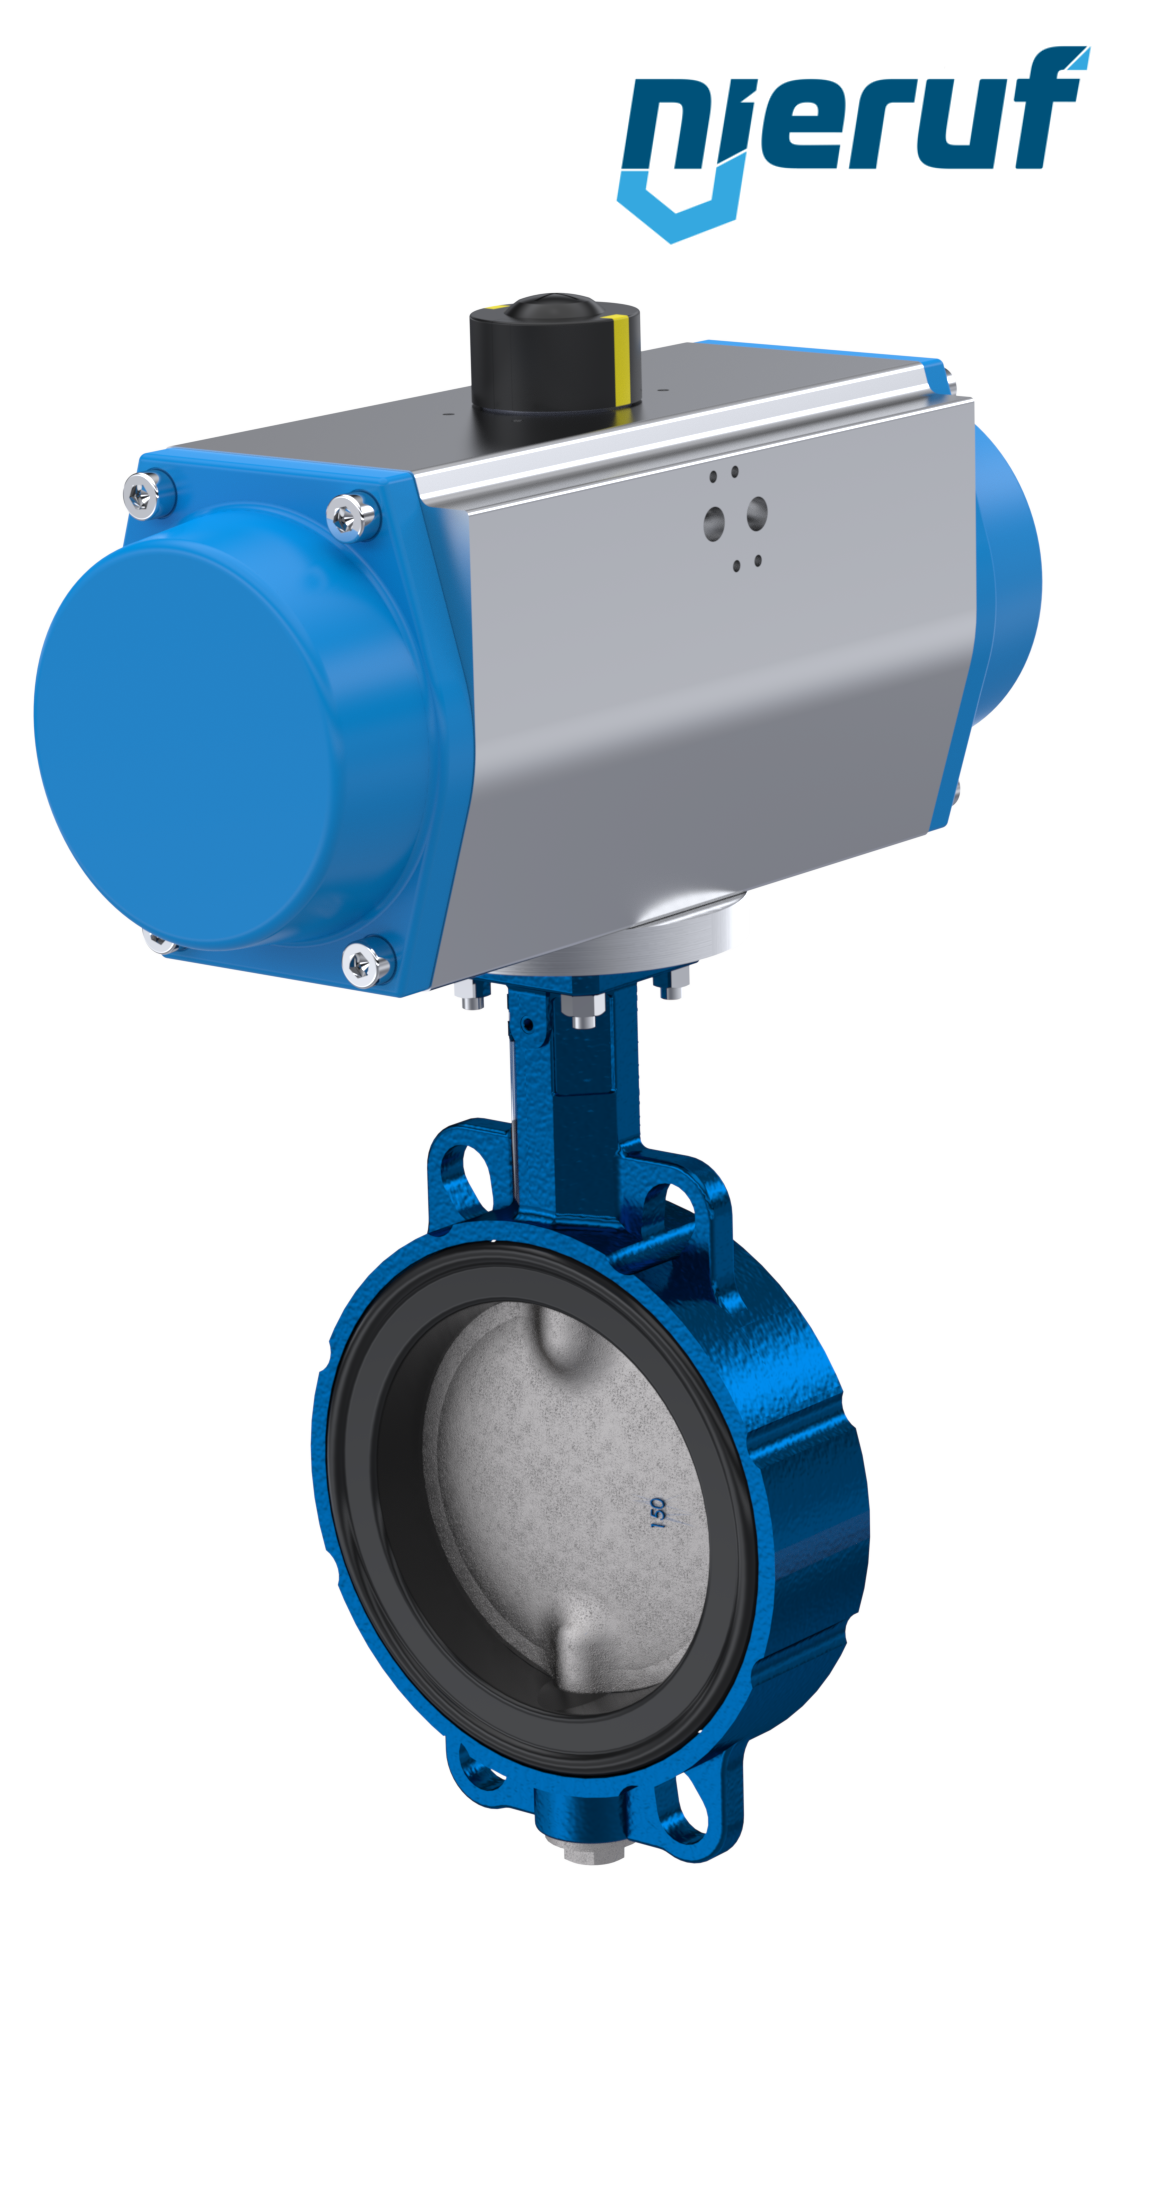 Butterfly valve DN 200 AK01 EPDM DVGW drinking water, WRAS, ACS, W270 pneumatic actuator single acting